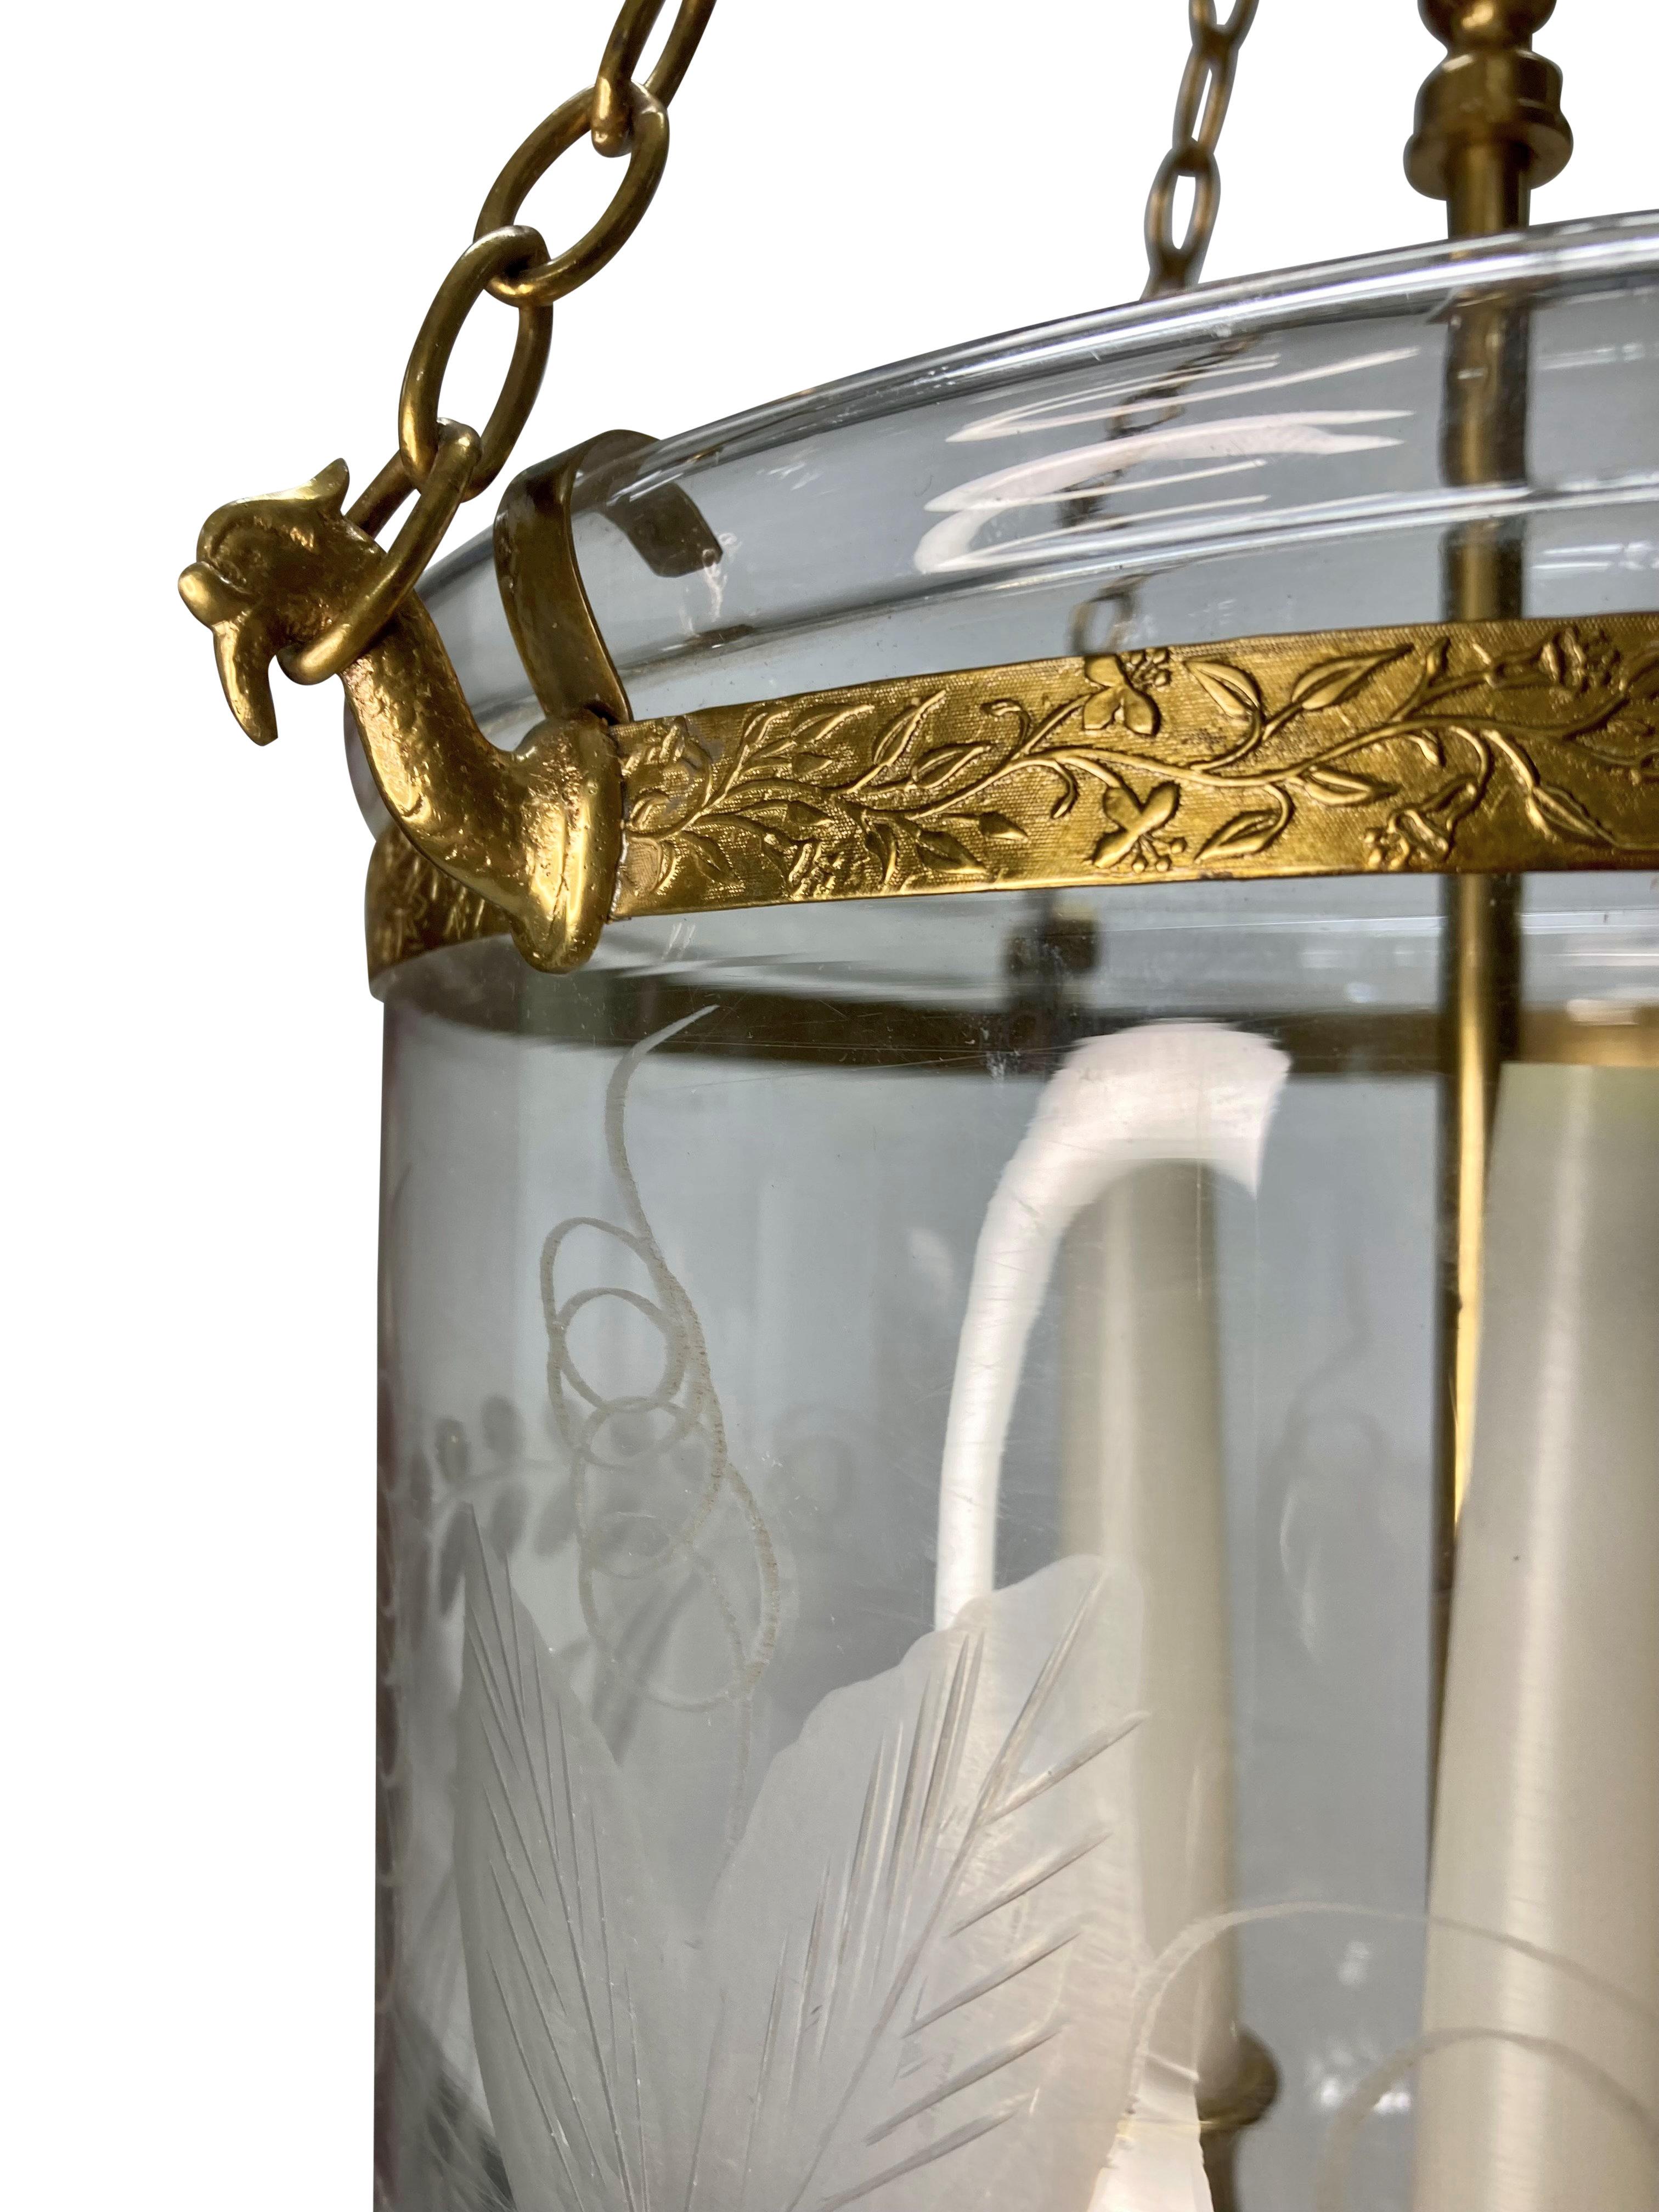 Early 20th Century English Bell Lantern With Brass Fittings & Grape Vine Design For Sale